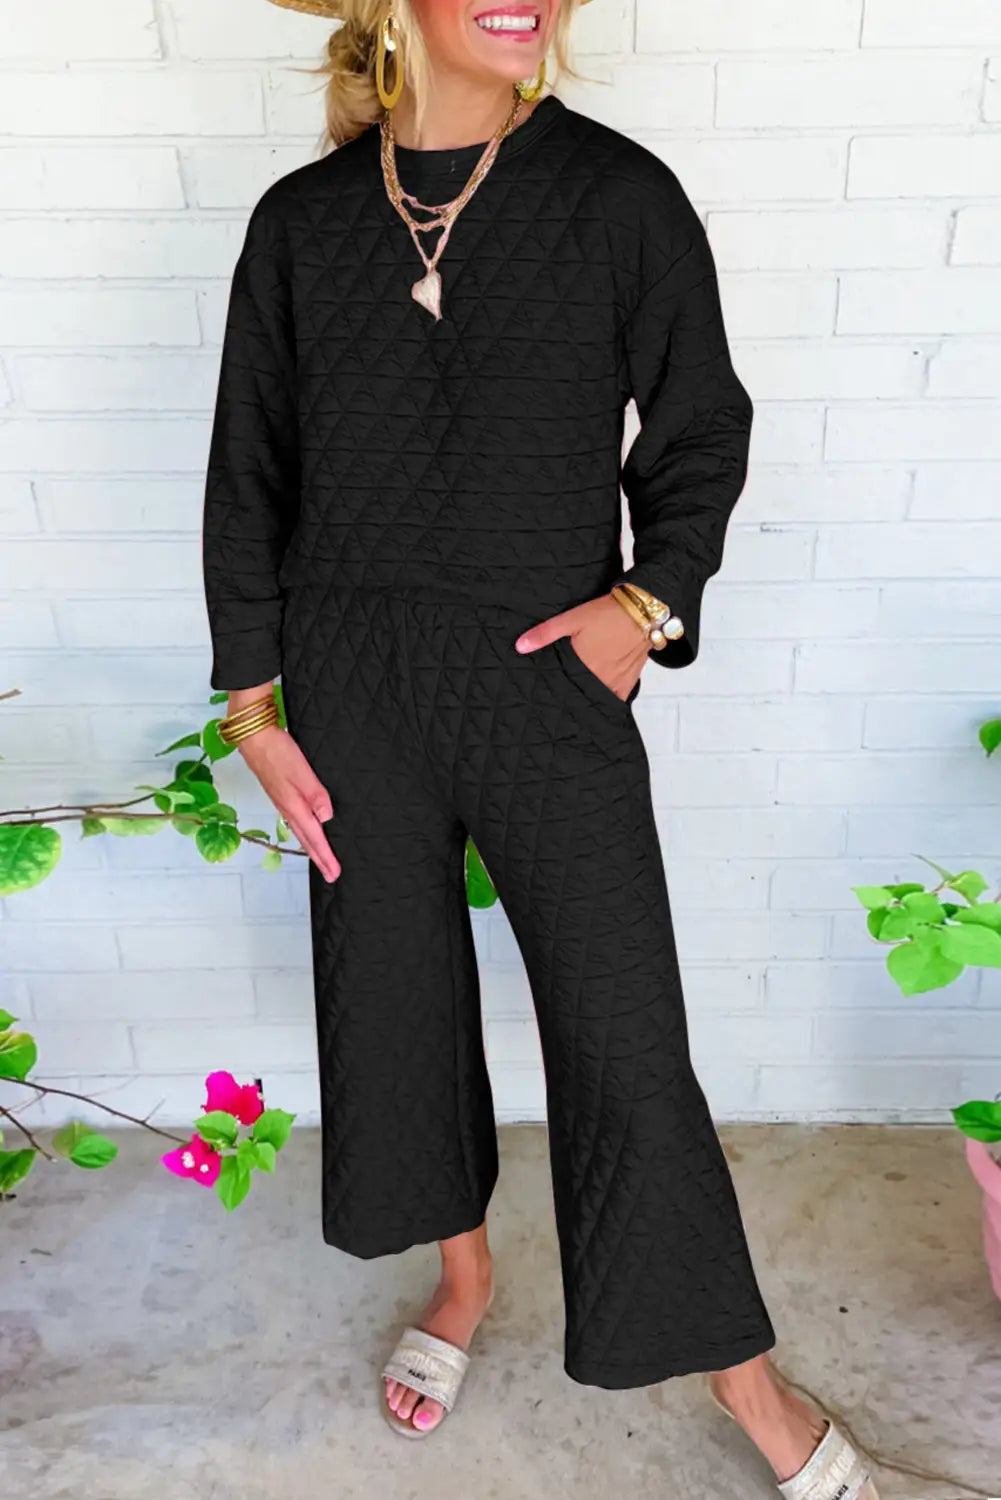 Black textured long sleeve top shorts outfit - 2xl / 95% polyester + 5% elastane - loungewear